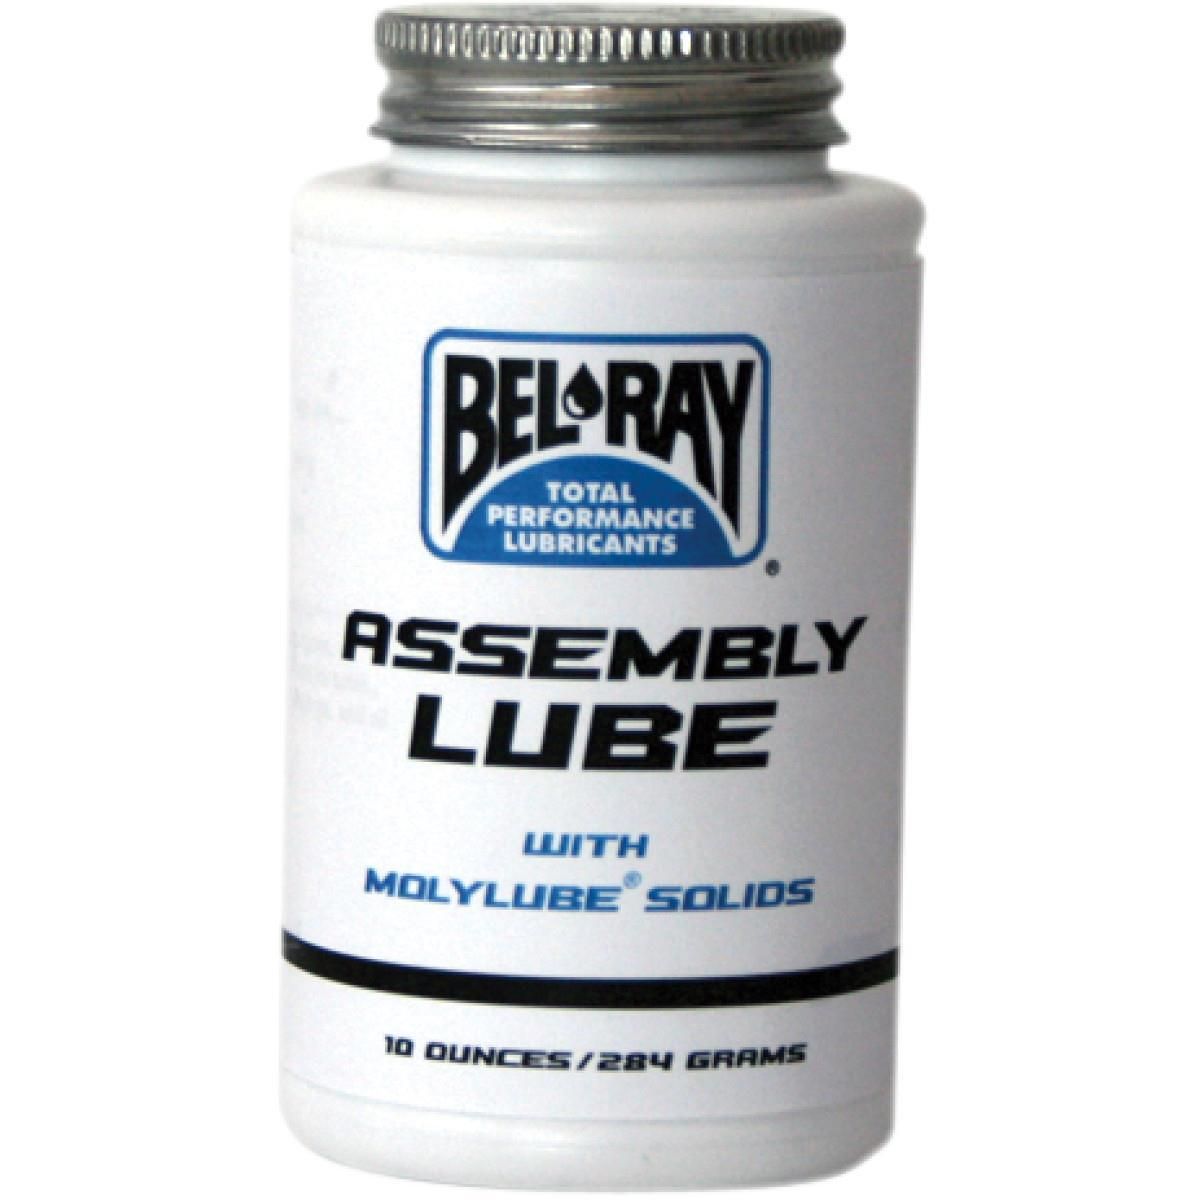 4CTS-99030-CAB10-949 Assembly Lube - 10oz.